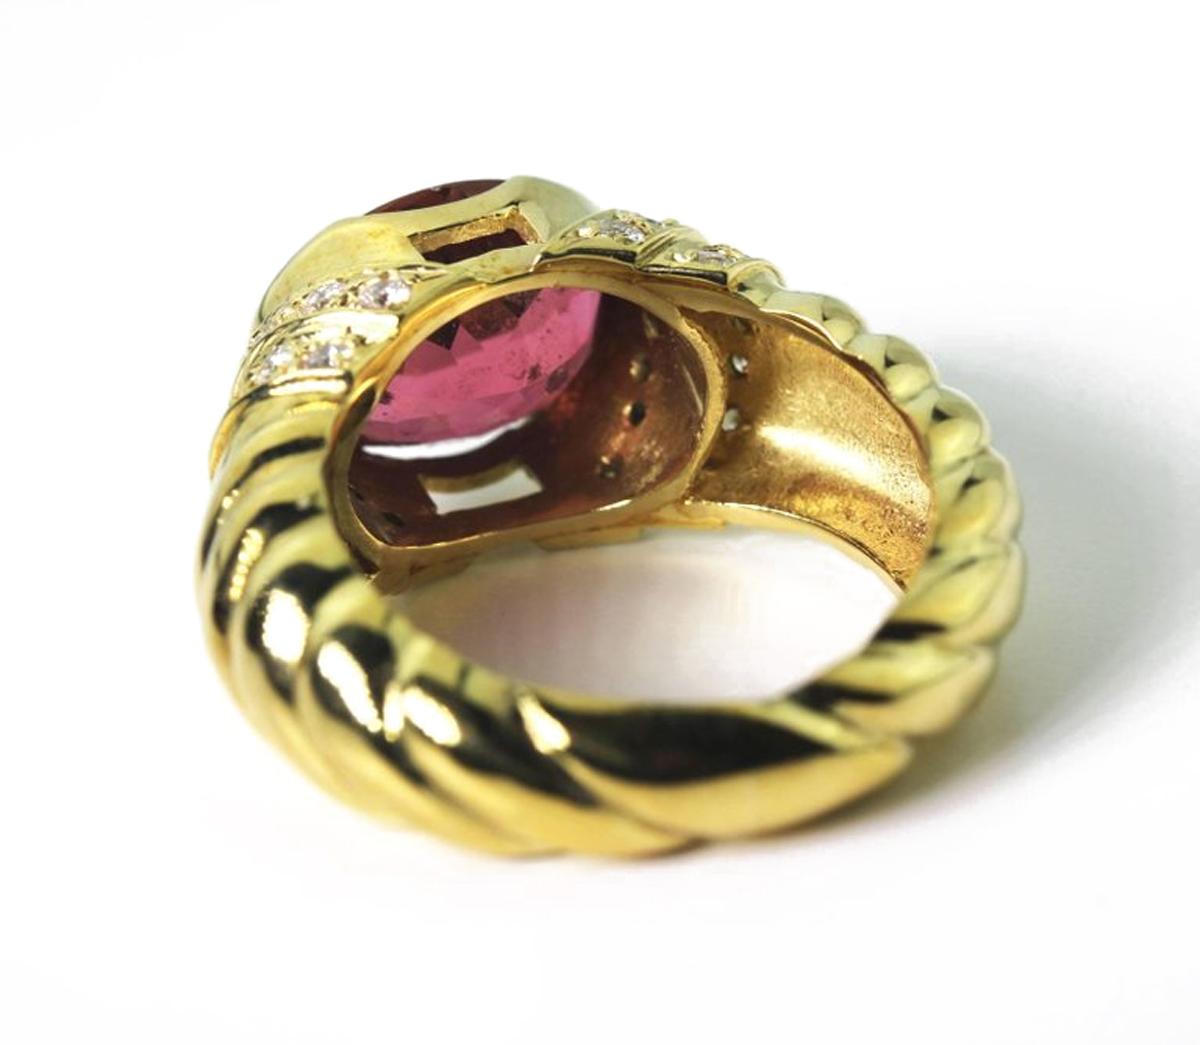 AJD Elegant 4Ct Pinky Red Tourmaline & Diamonds 18kt Gold Cocktail/Dinner Ring In New Condition For Sale In Raleigh, NC